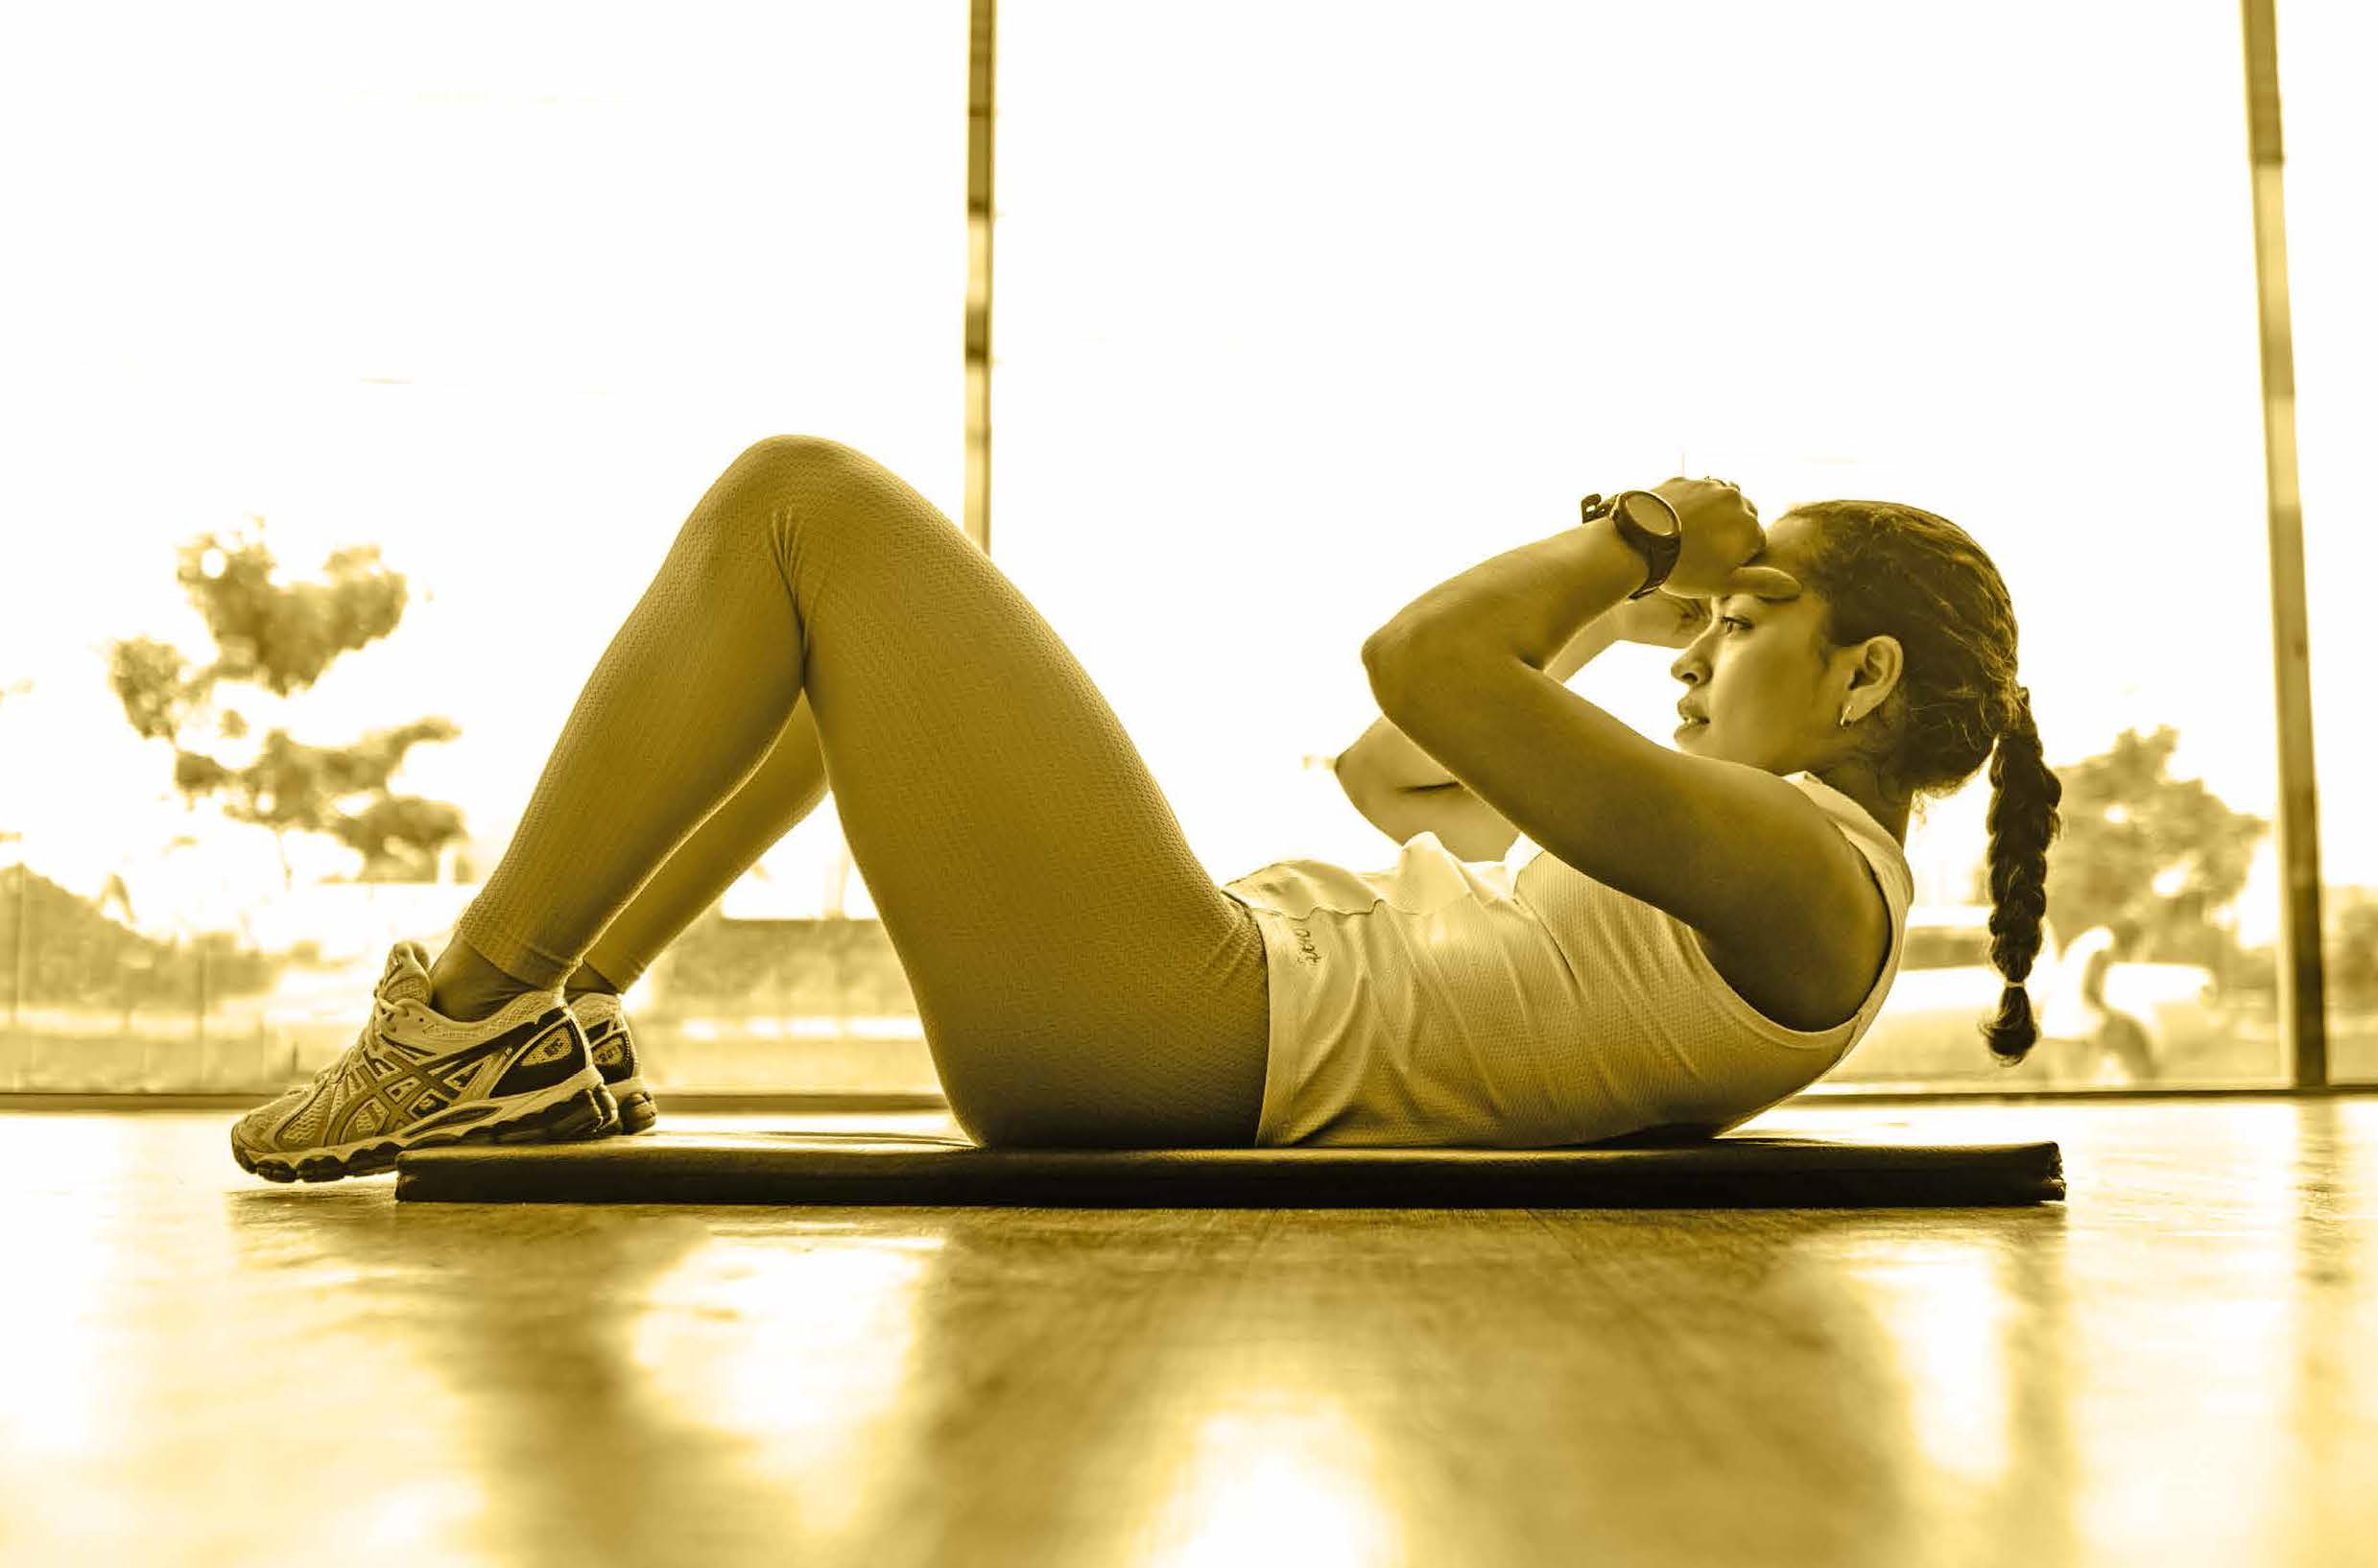 Image of woman doing sit ups on exercise mat